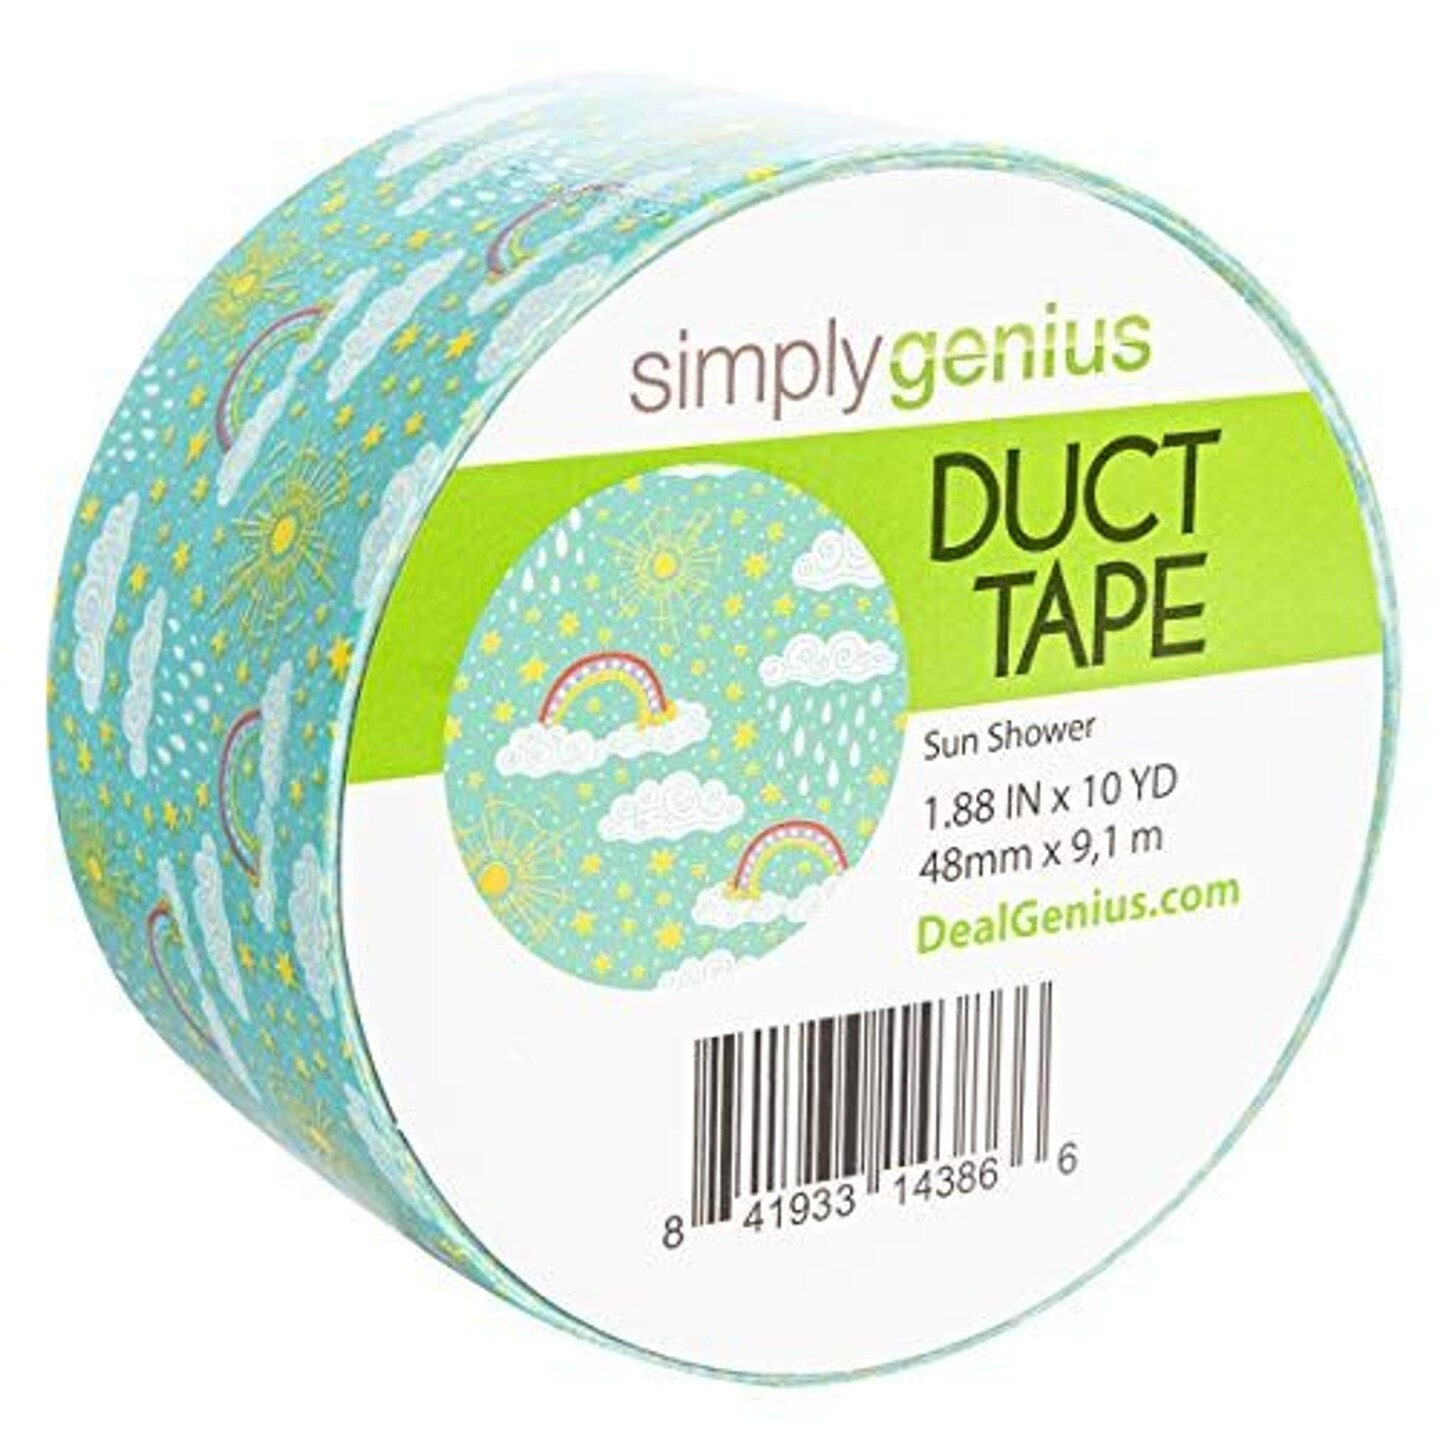 Simply Genius Pattern Duct Tape Heavy Duty - Craft Supplies for Adults - Colored Duct Tape - Single Roll 1.8 in x 10 yards - Colorful Tape for DIY, Craft &#x26; Home Improvement (Sun Shower)